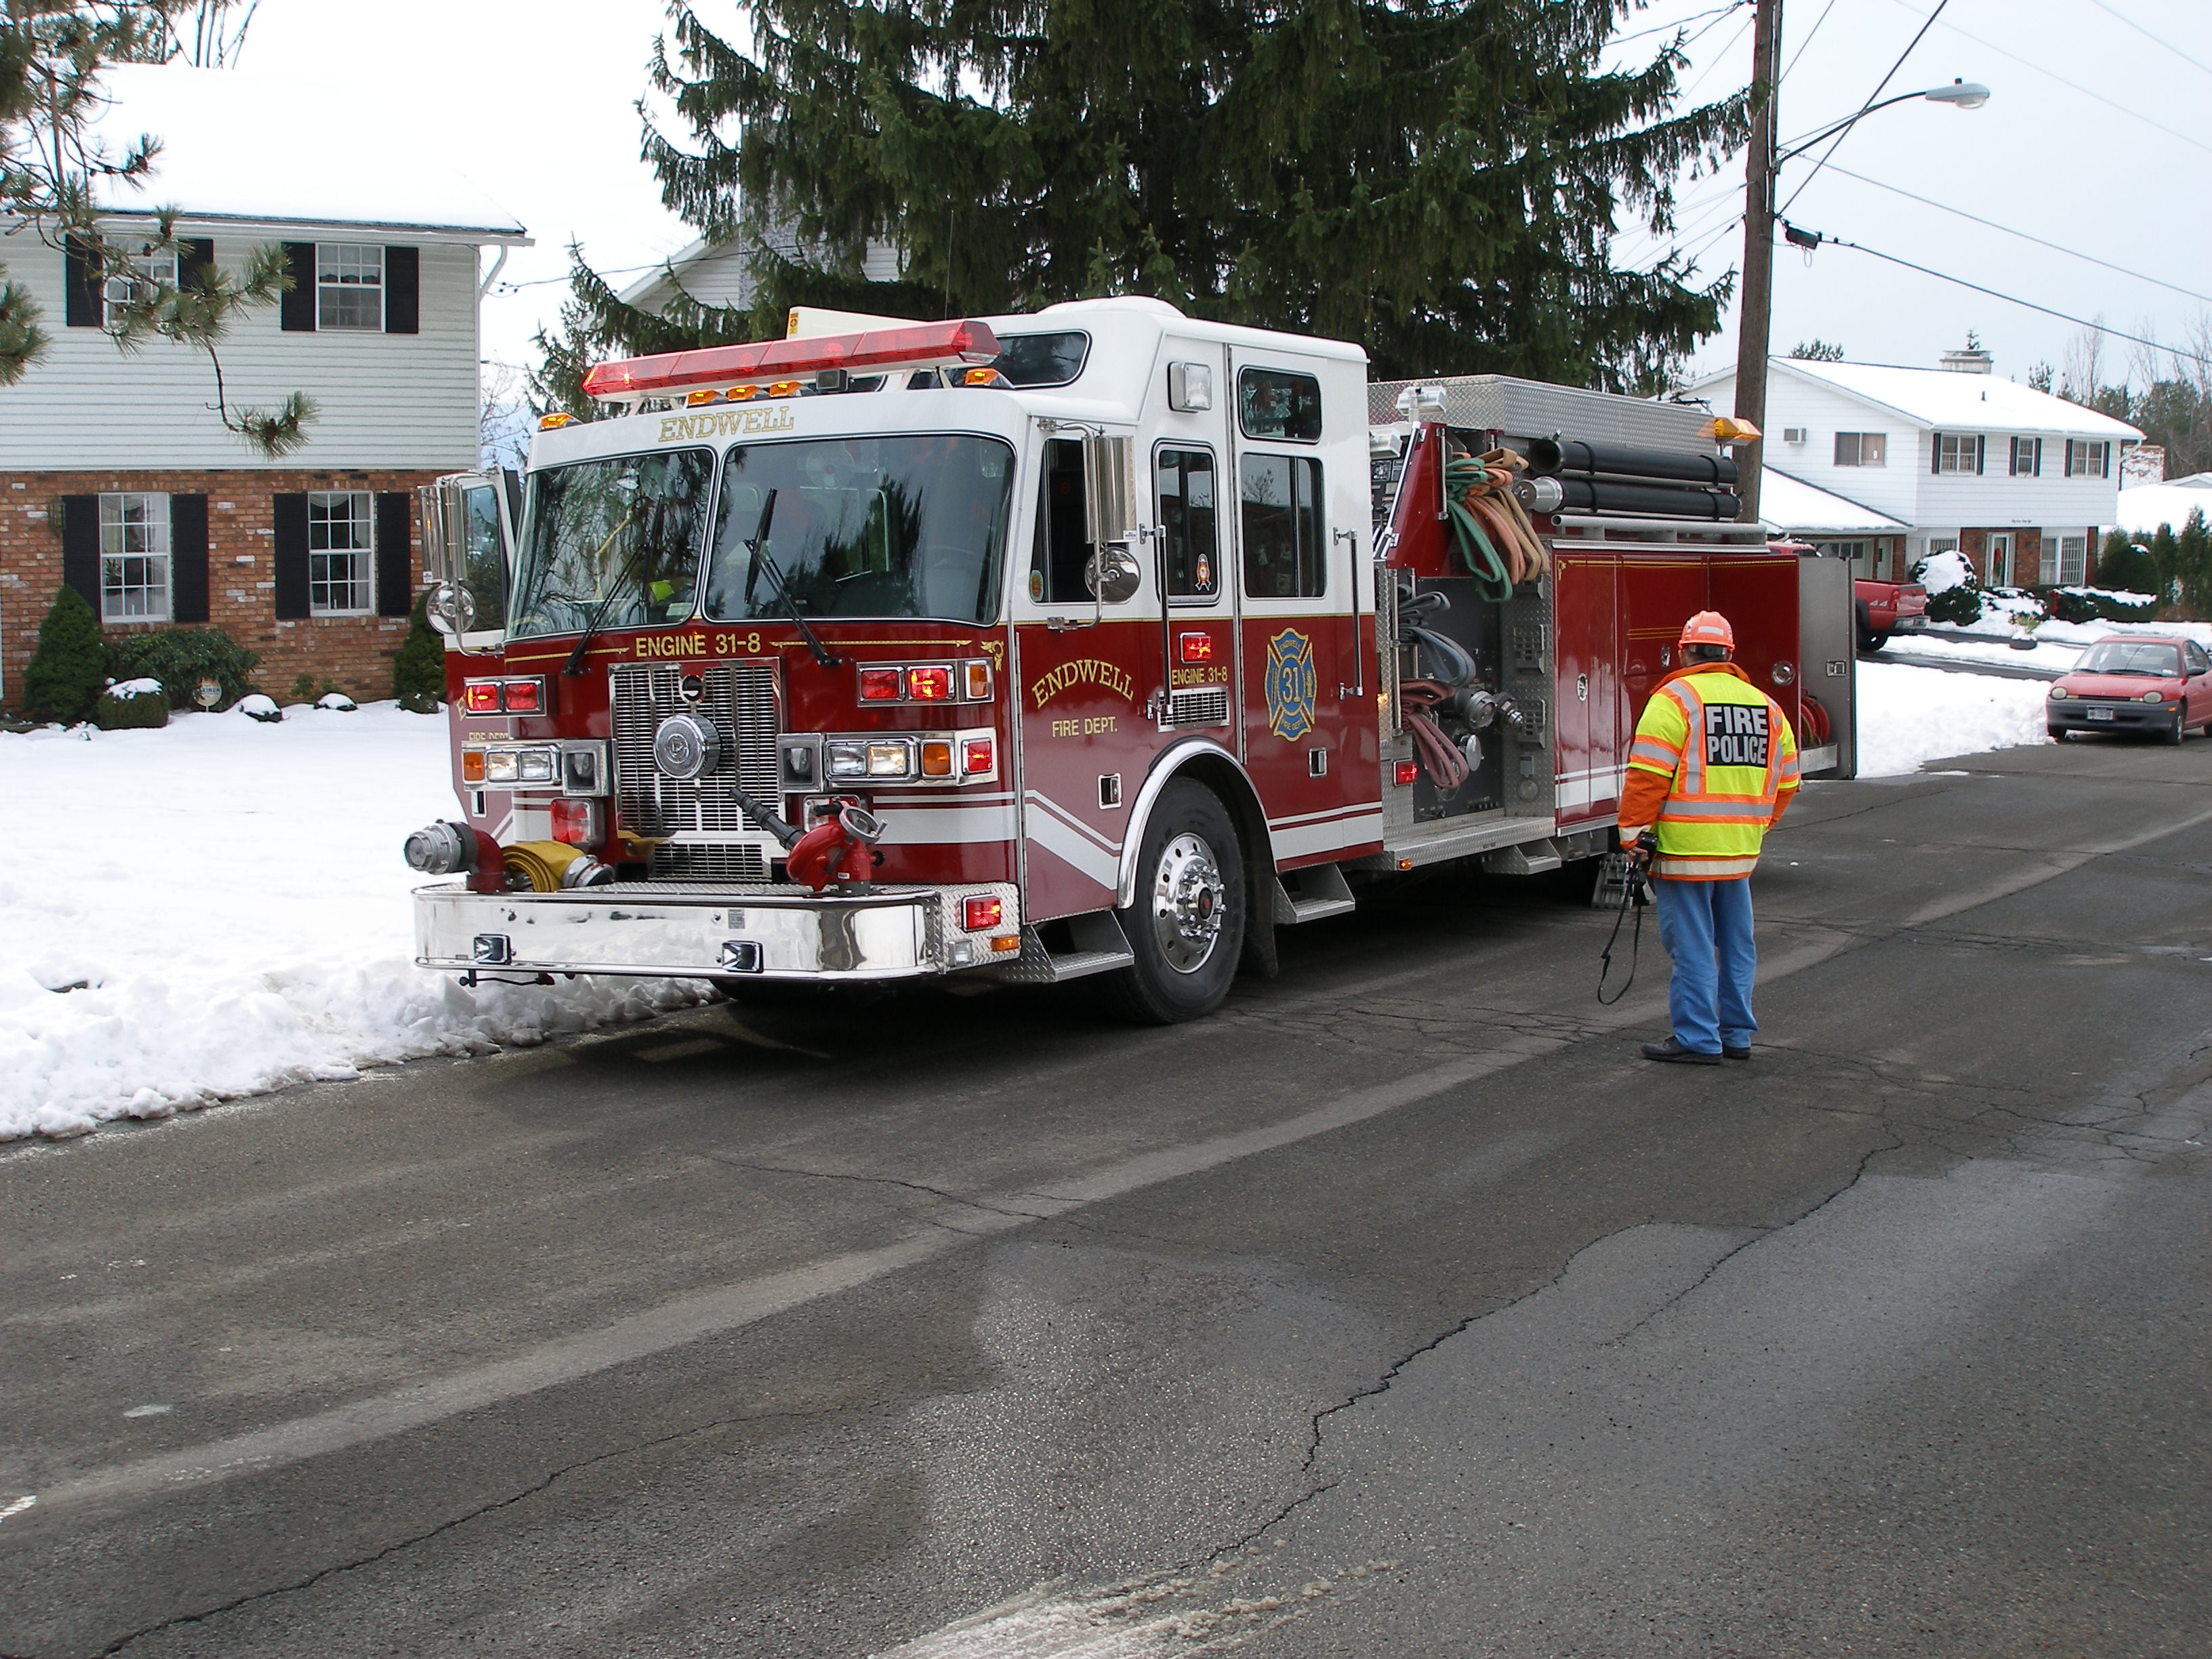 12-23-05  Response - Fire, Valleyview Stove Fire